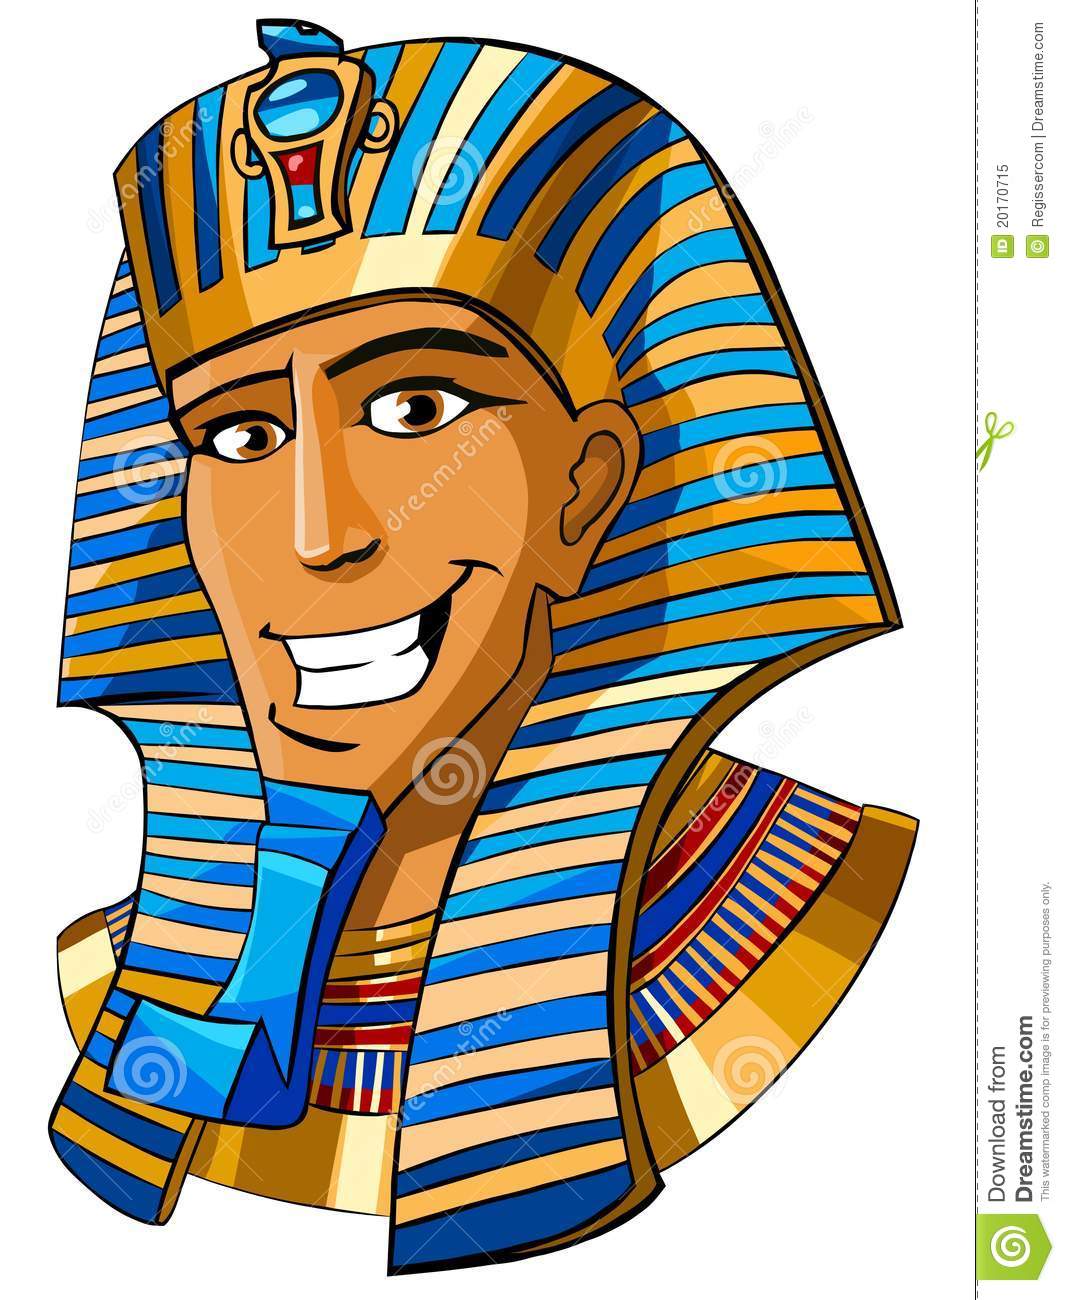 Cartoon Smiling Face Of Egyptian Pharaoh On A White Background